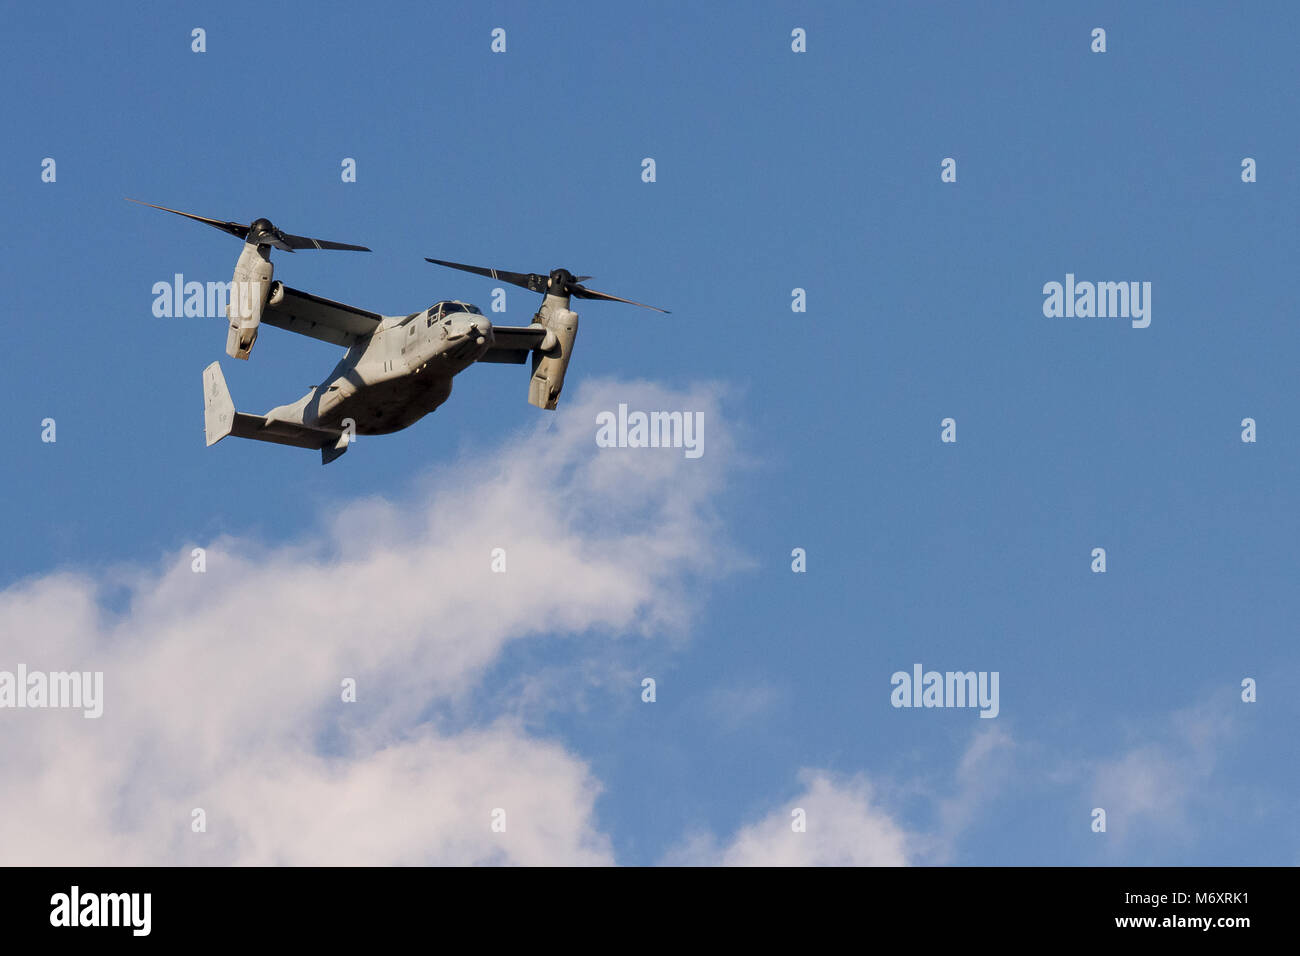 Bell Boeing V-22 Osprey tilt-rotor aircraft, operated by the US Marine Corps, flying in Kanagawa, Japan. Stock Photo